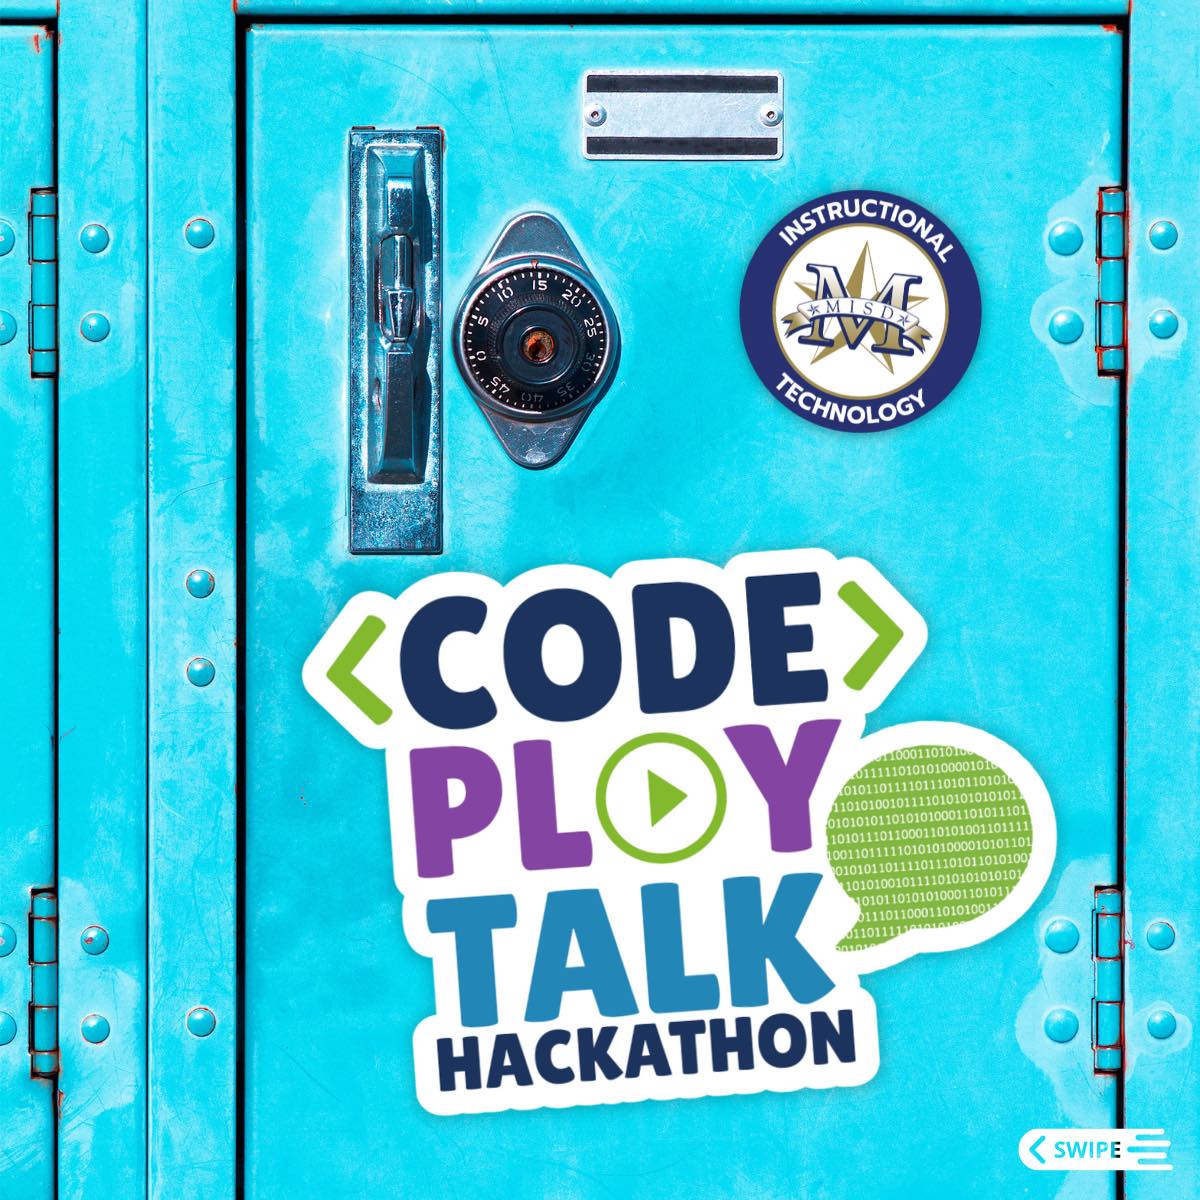 Today's the day! If you want to see some amazing students do some amazing things with coding and technology, come out to @RalphHPoteetHS this morning for our Hackathon! Good luck to all of our teams today! @MISDiTech @mesquiteisdtx #MadeToExcel #ExcellenceAlways